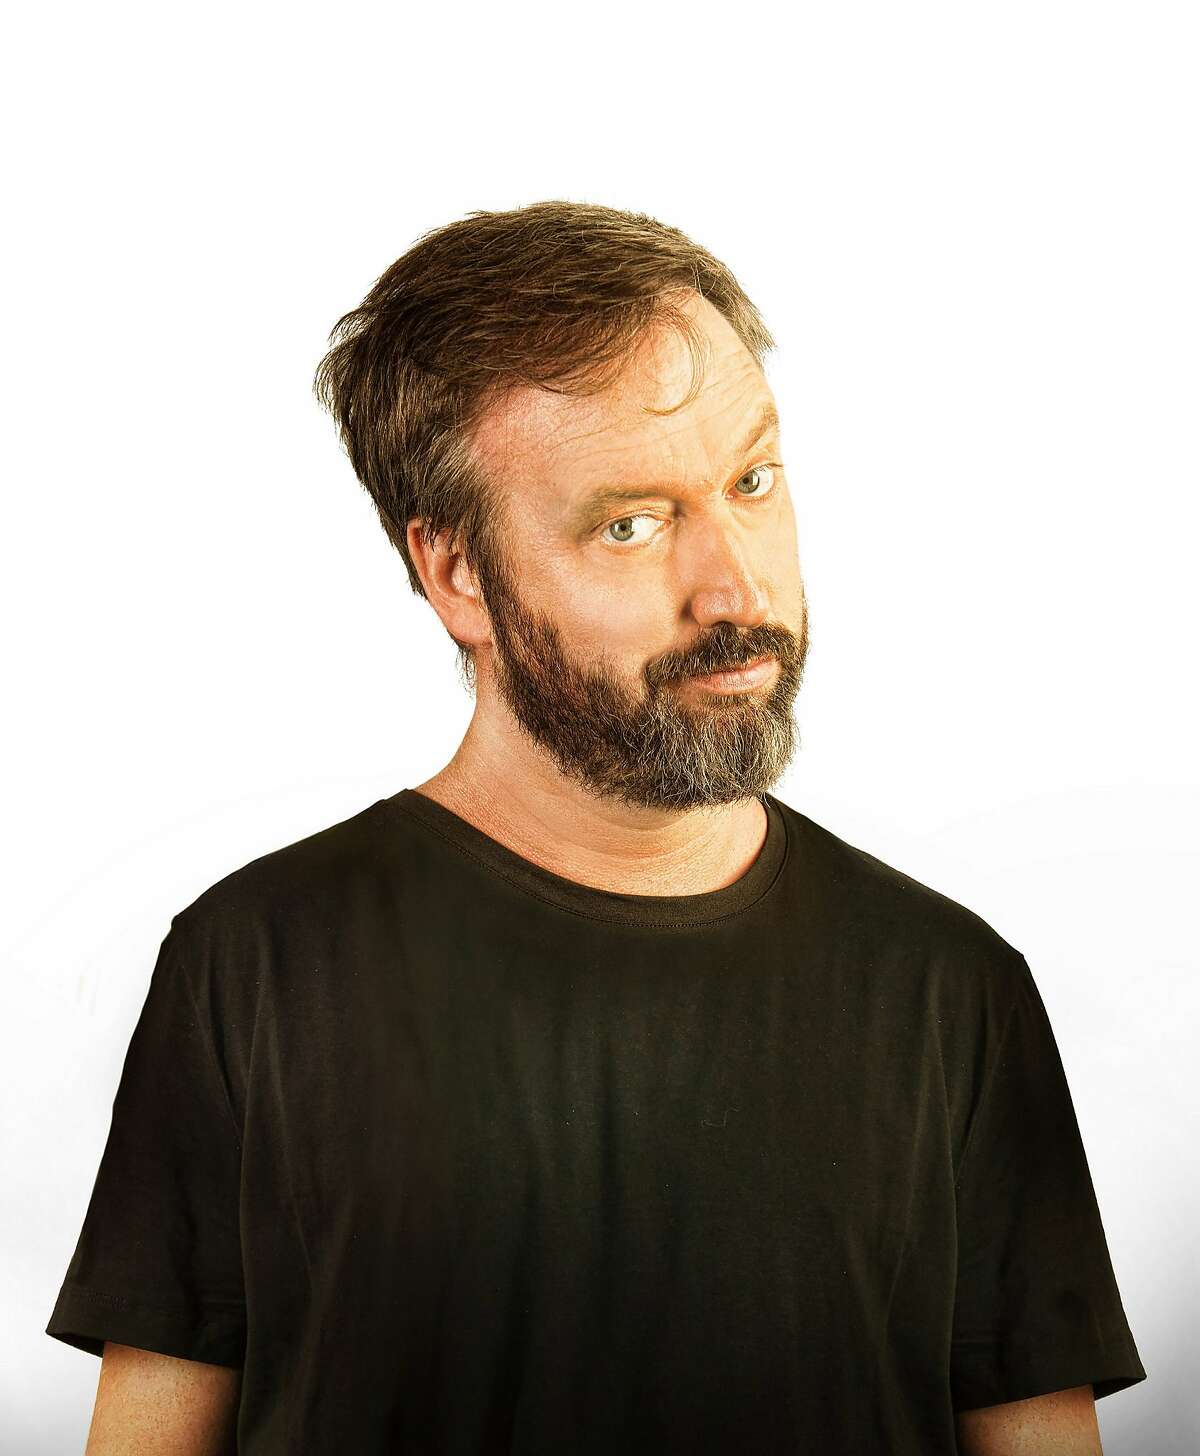 Tom Green performs at Cobb's Comedy Club from April 27-28, 2018.